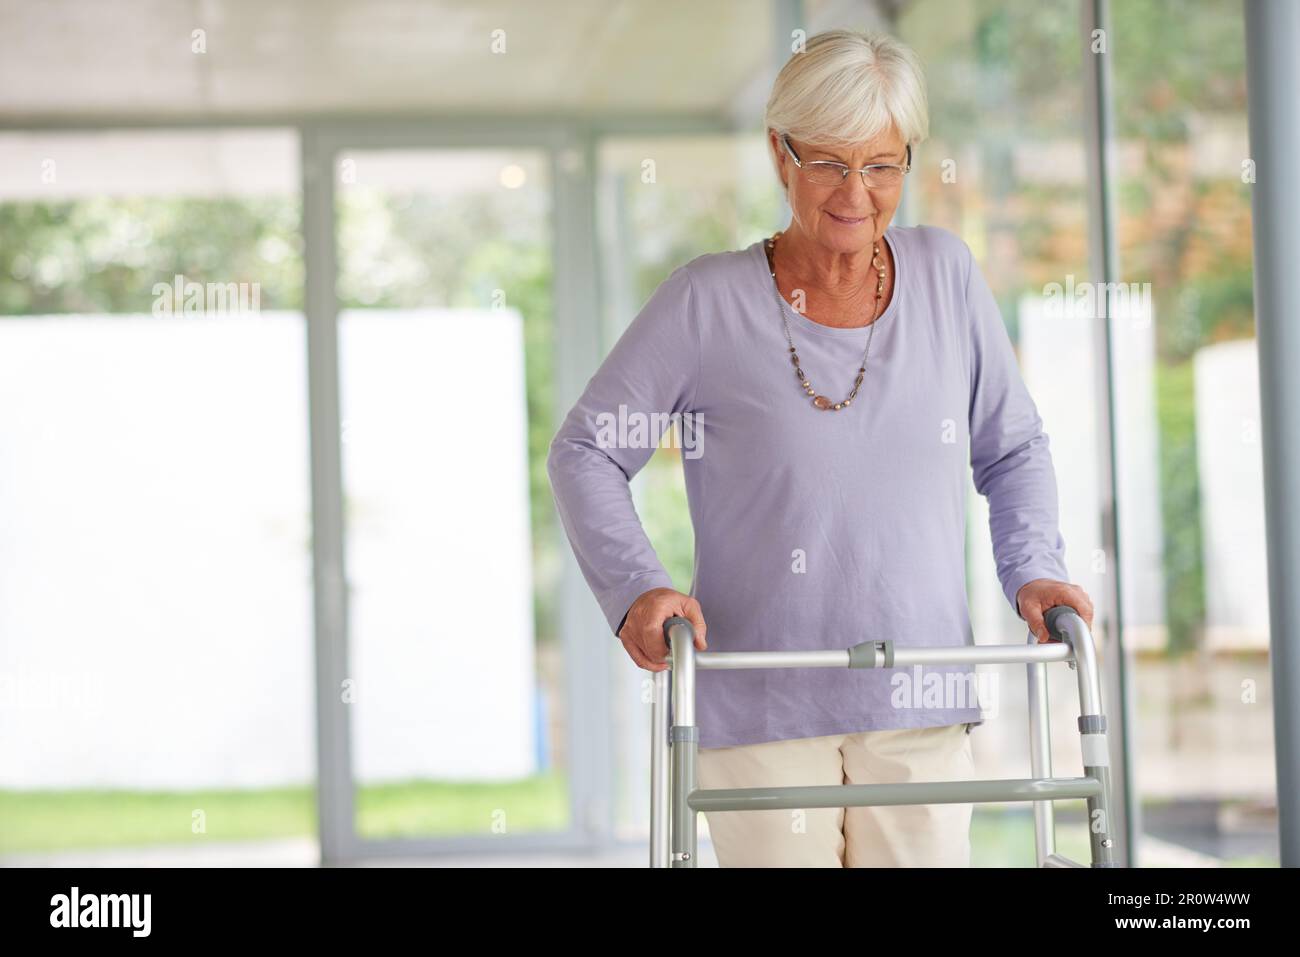 Post-surgery exercise is essential. a senior woman walking with care, using an orthopedic walker. Stock Photo